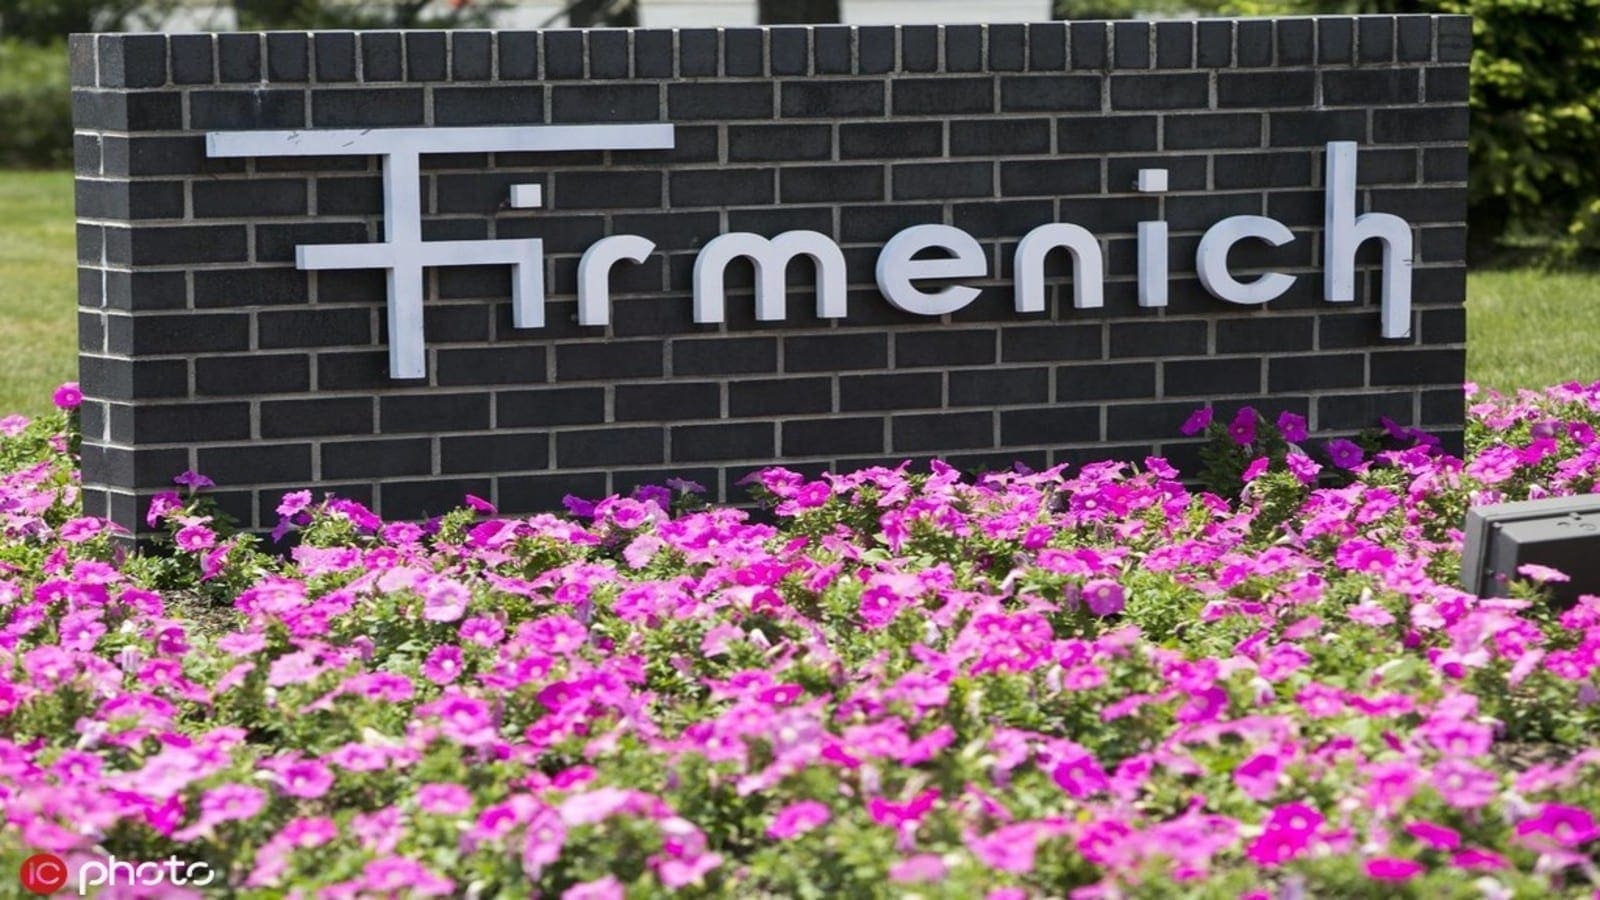 Firmenich partners with Novozymes, Microsoft to launch new technologies for its business